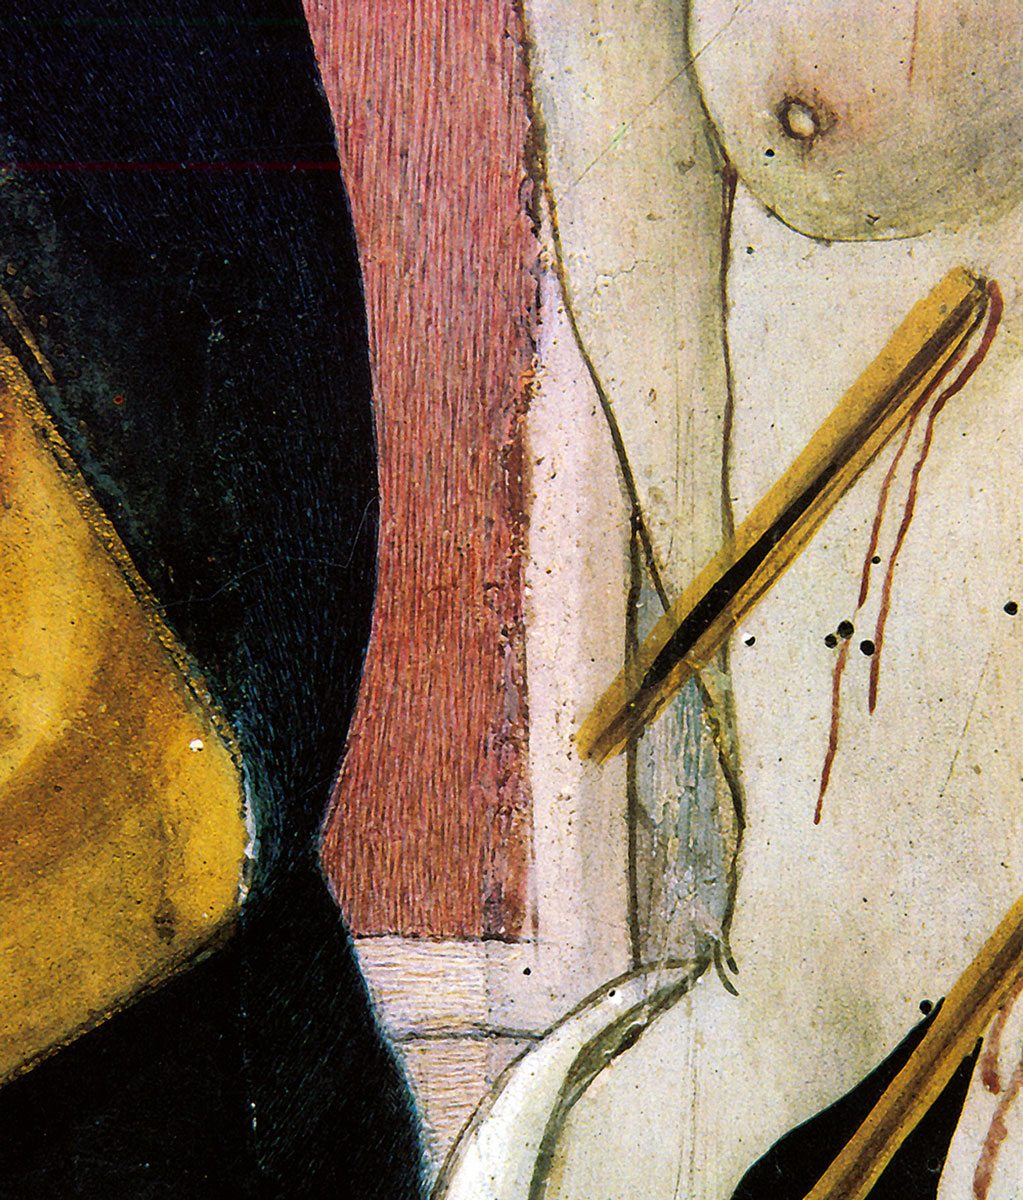 Detail of the restored Enthroned Madonna (fifteenth century), attributed to the Master of San Miniato, in the Pieve di San Bartolomeo at Pomino near Florence. The in-painting shown here (chromatic abstraction) reflects four distinct passes with four separate hues: the first yellow, the second orange-red, the third blue, and the last in tiny quantities of black to darken the overall effect.